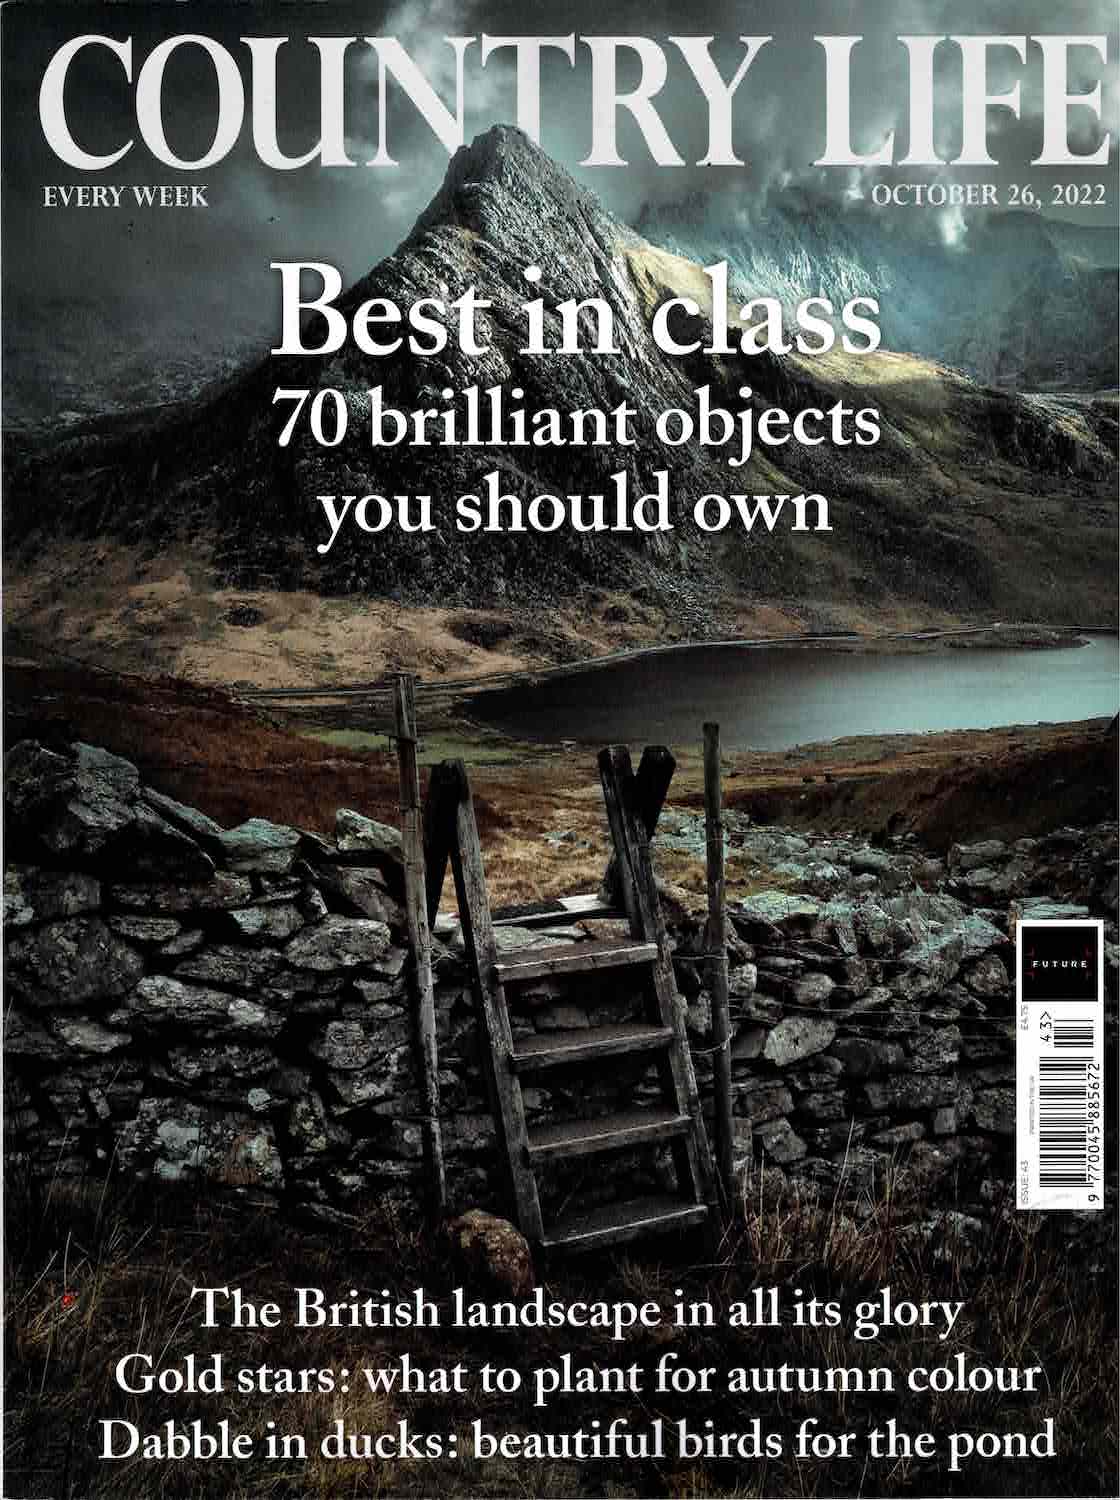 Country Life magazine's cover for October 2022 issue